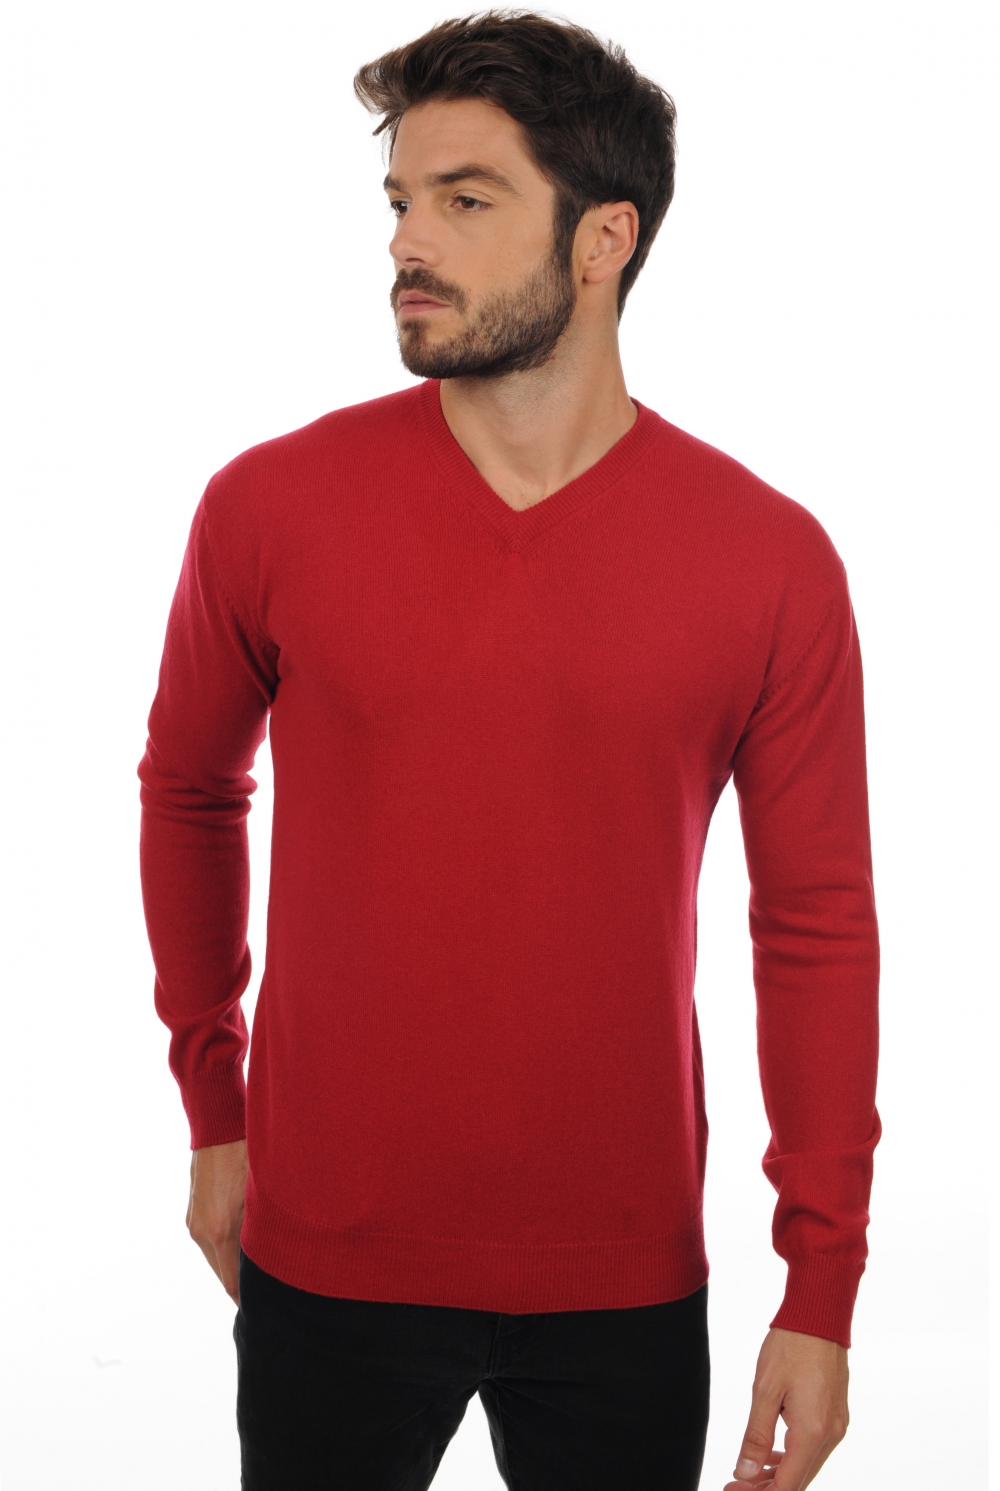 Cachemire pull homme col v maddox rouge velours l